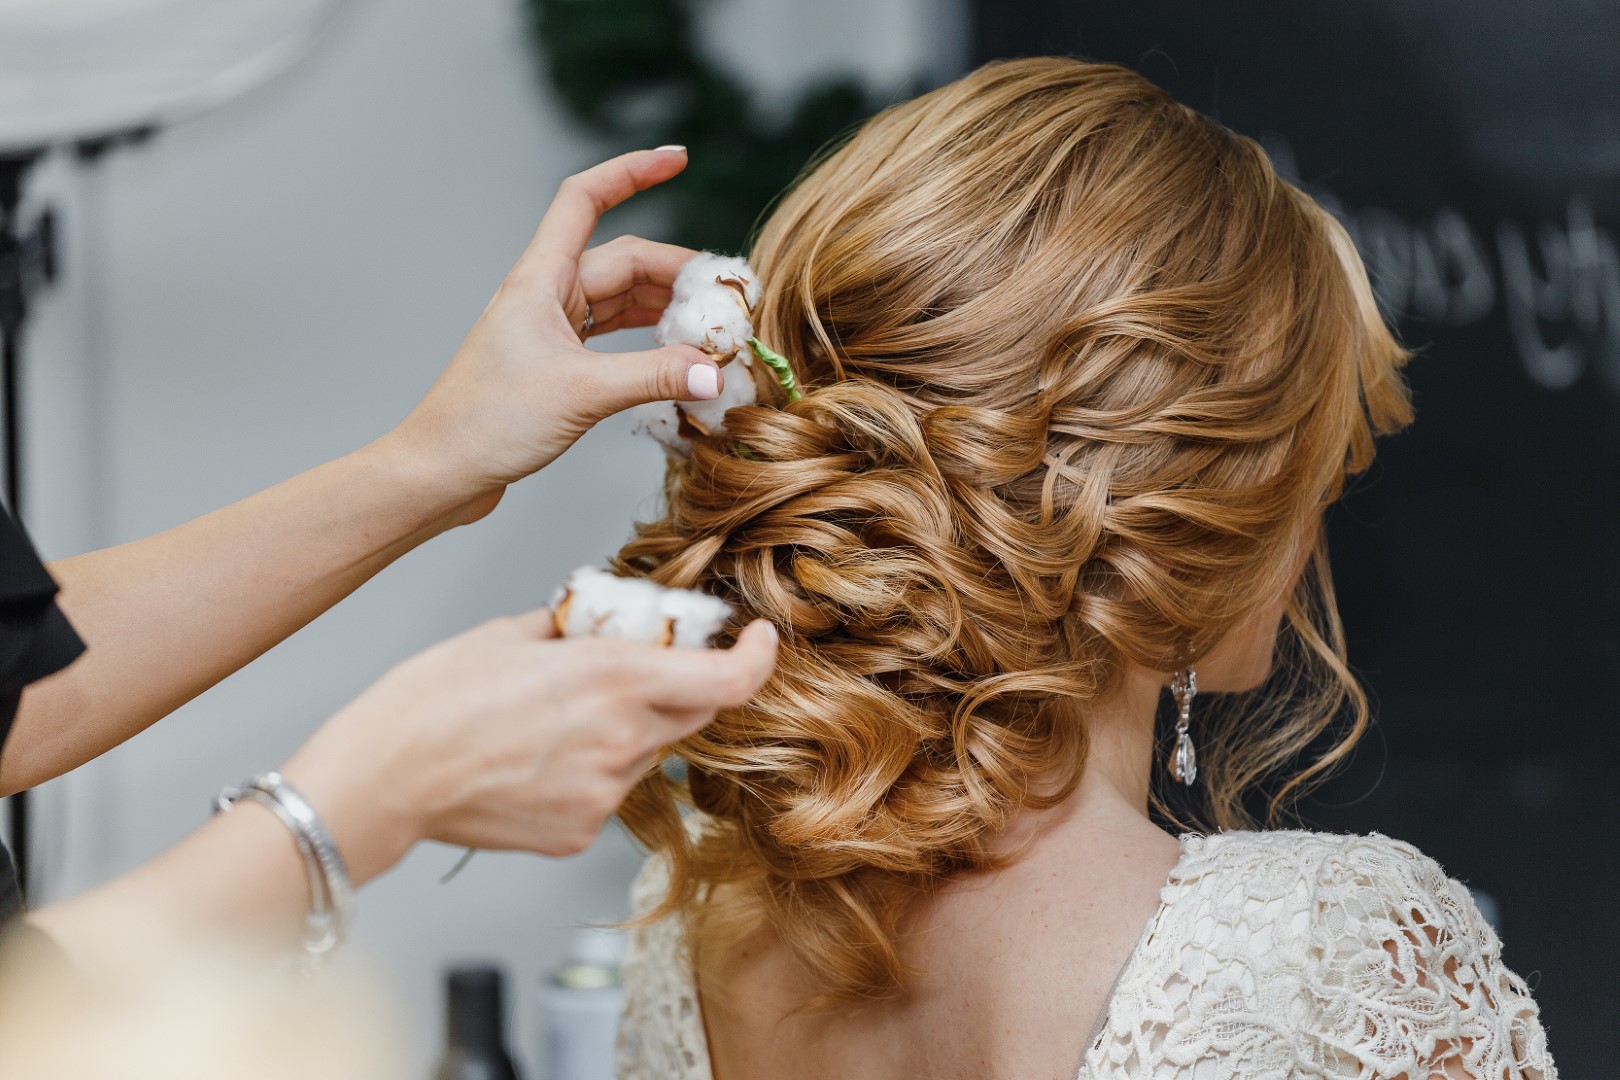 Hair Styling Class for Bridal and Red Carpet - Hollywood Makeup School